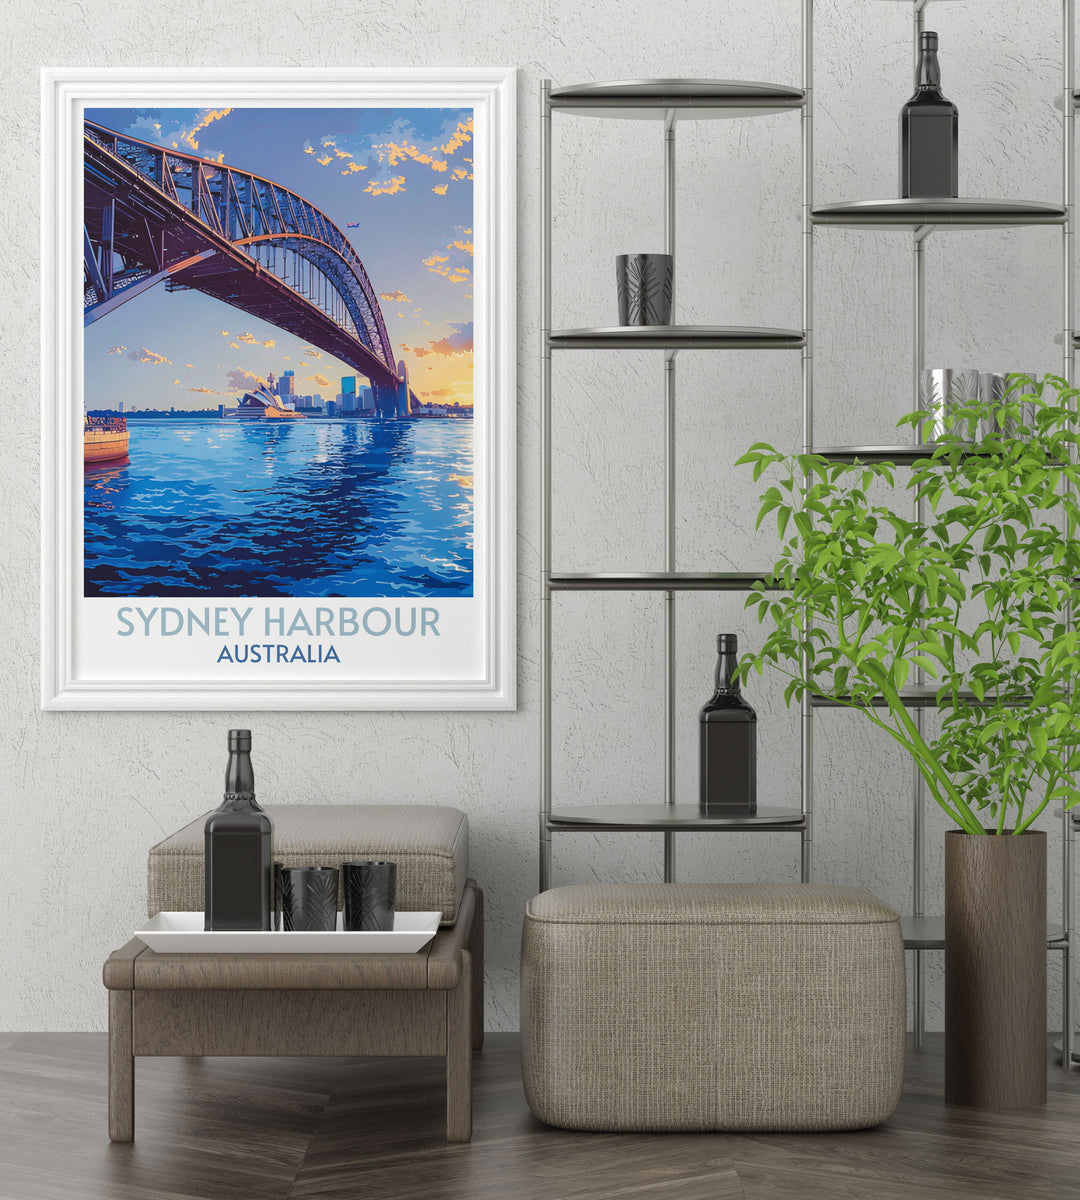 Illustration of Sydney Harbour Bridge during a bright day, perfect wall art for any modern living space.